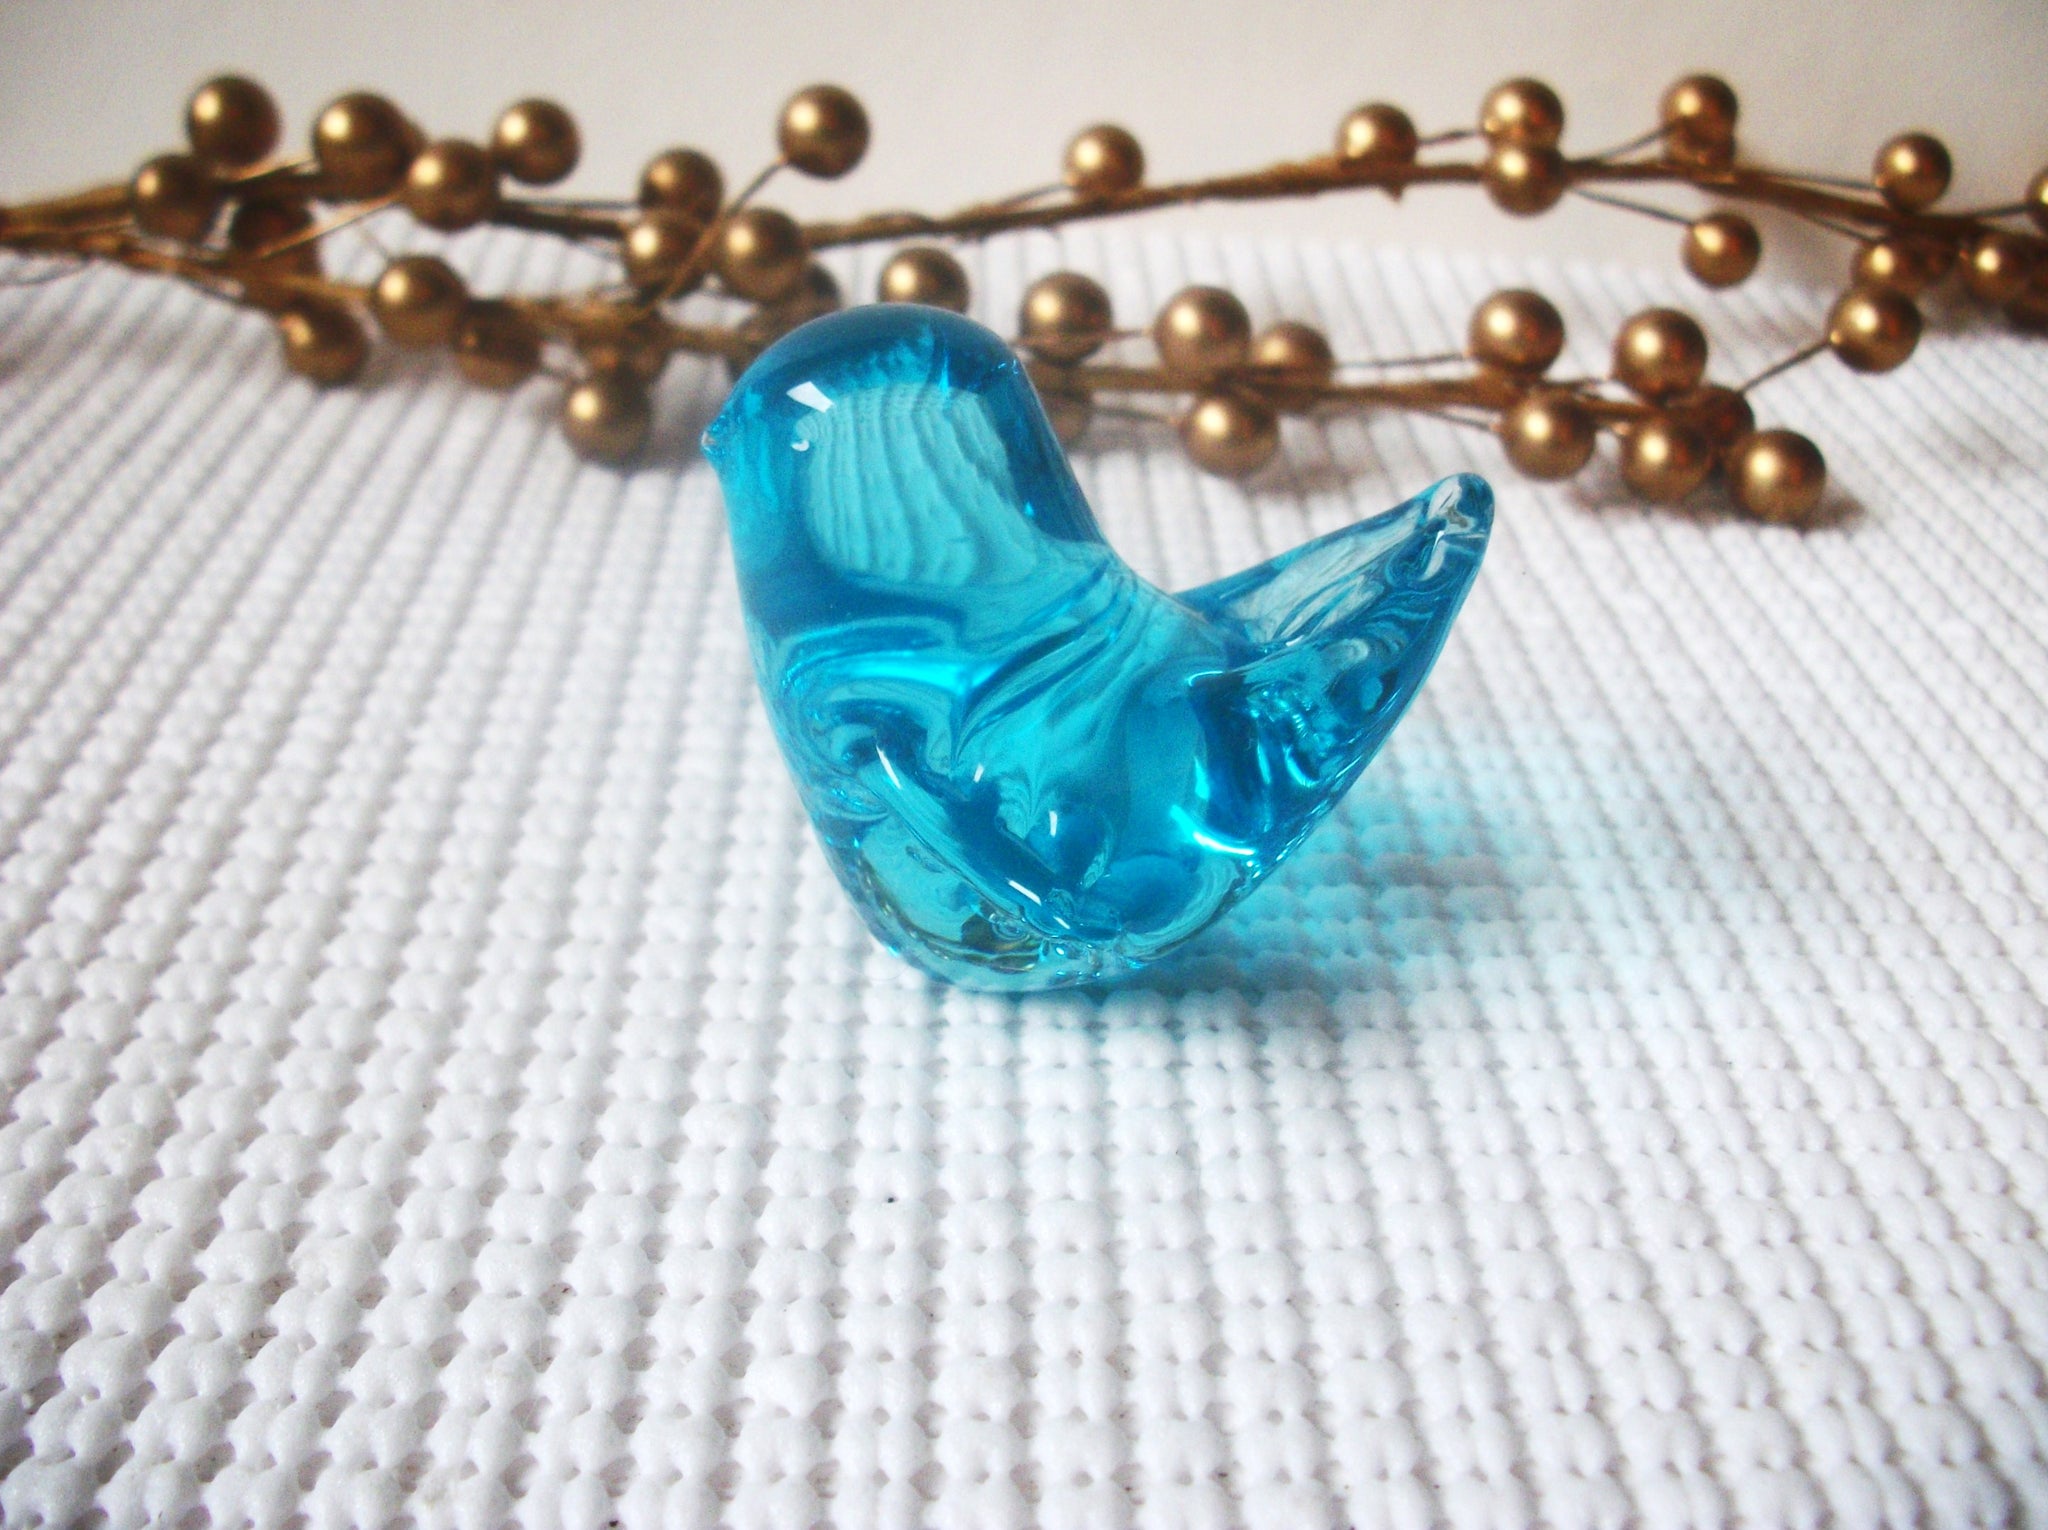 Vintage Small Blue Glass Unmarked Bird Figurine, Bookcase Decor, Bedside Table Decor, Collectible Blue Glass, Gift for Bird Lover C300